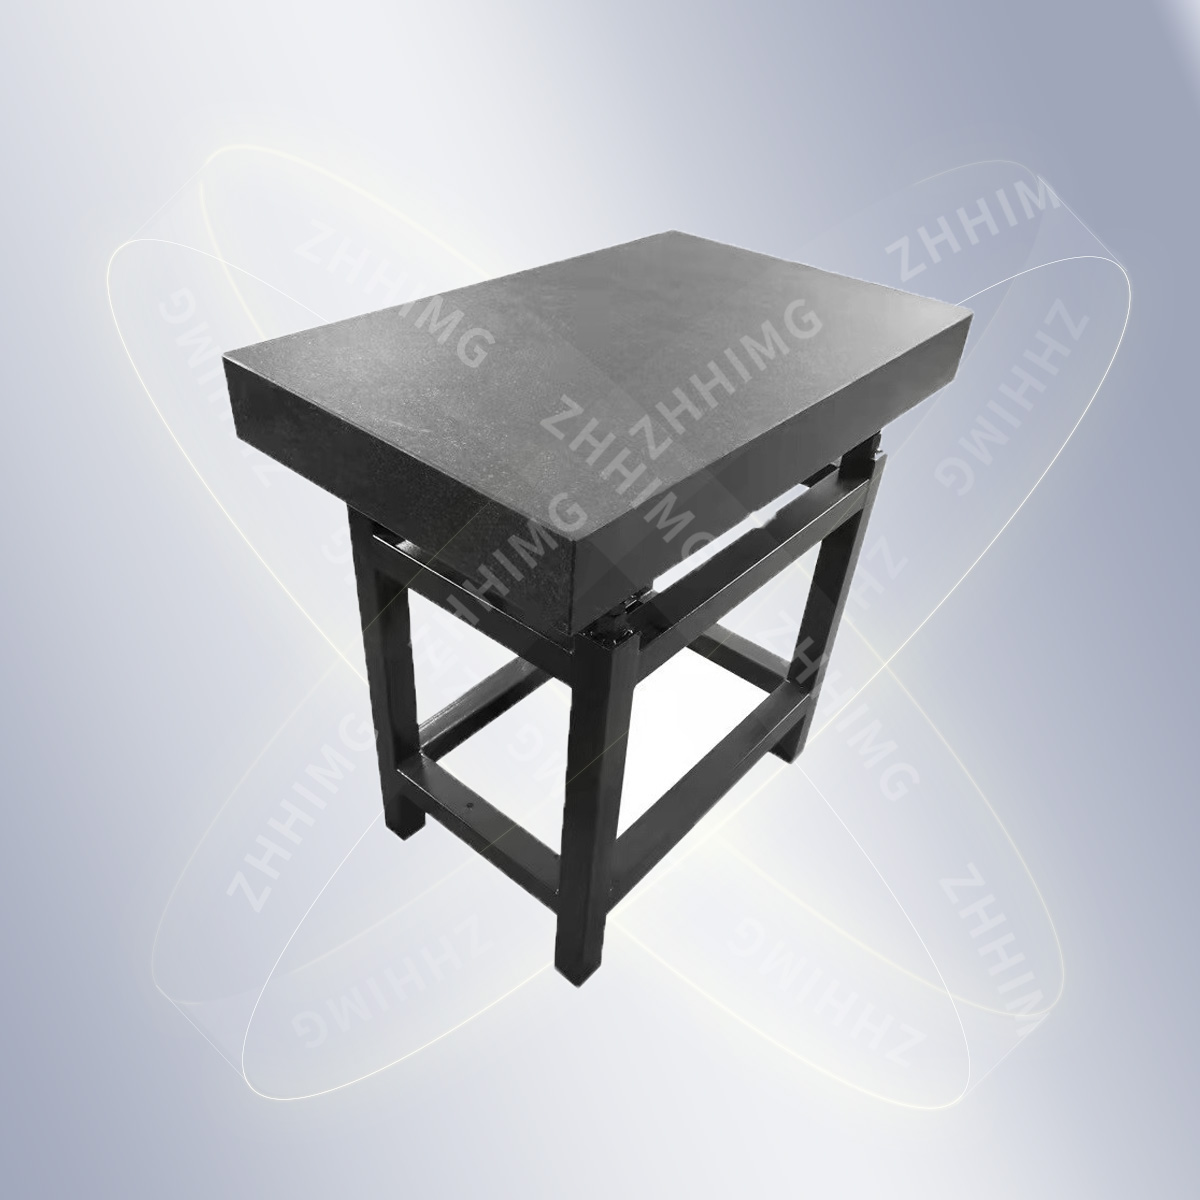 Lowest Price for Precision Granite For Oled Equipments - Granite Inspection Surface Plates & Tables – ZHONGHUI